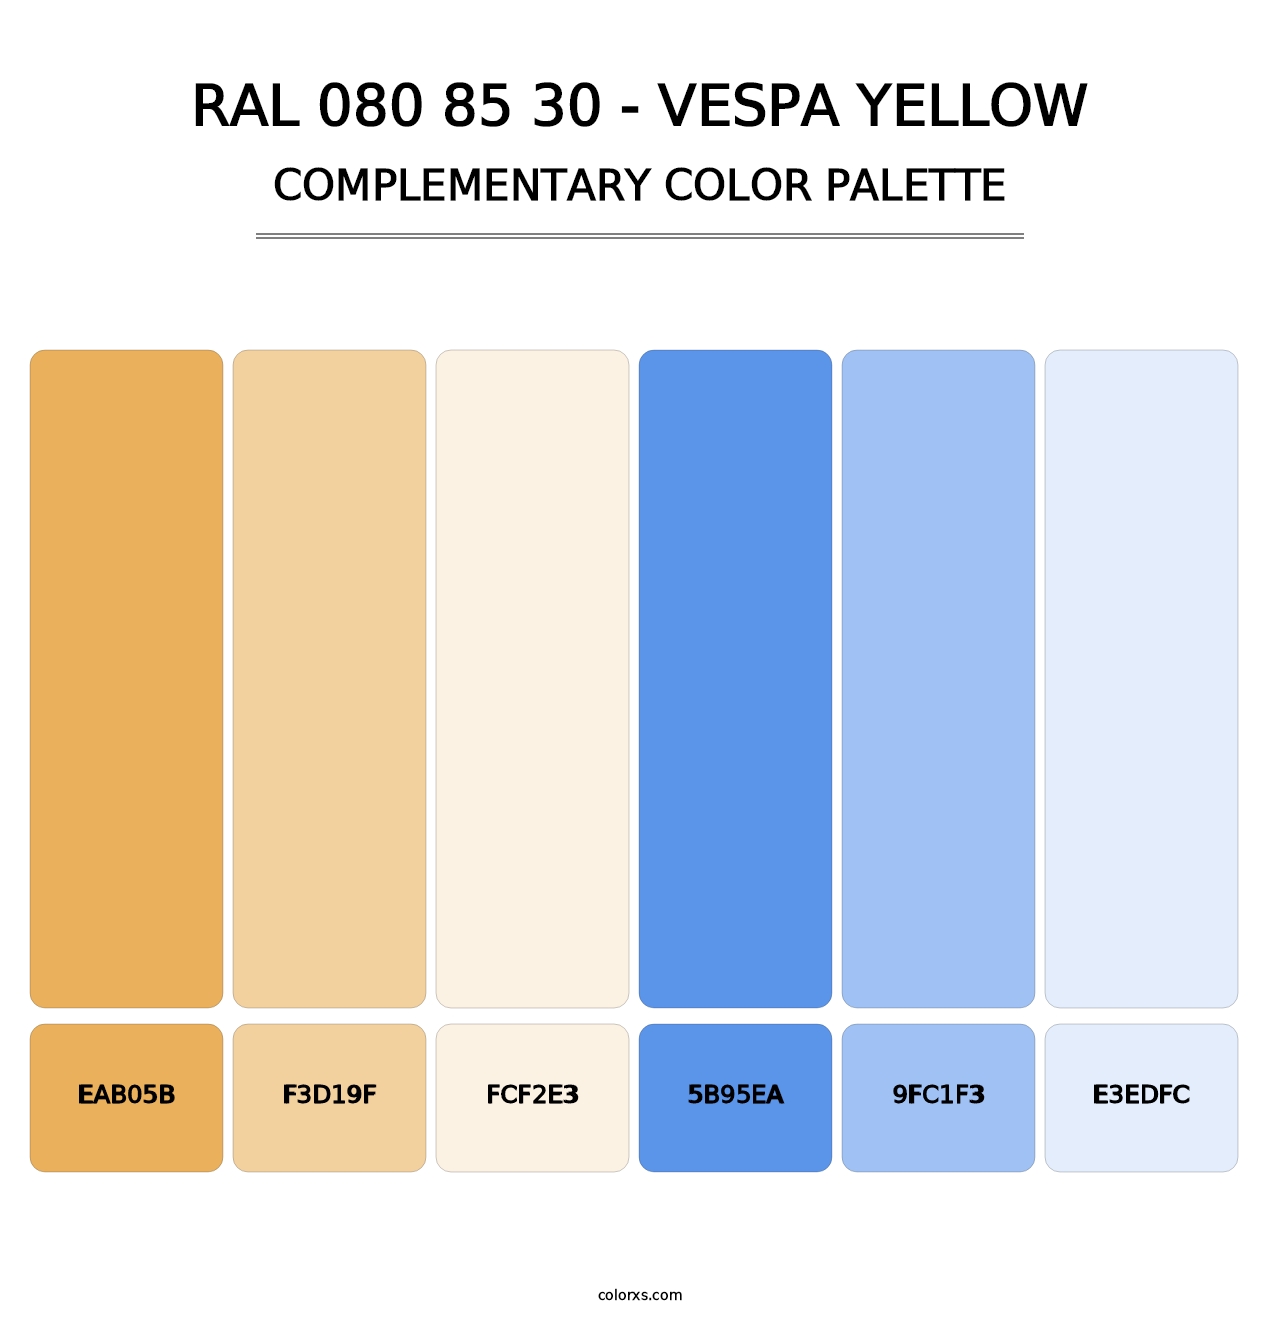 RAL 080 85 30 - Vespa Yellow - Complementary Color Palette